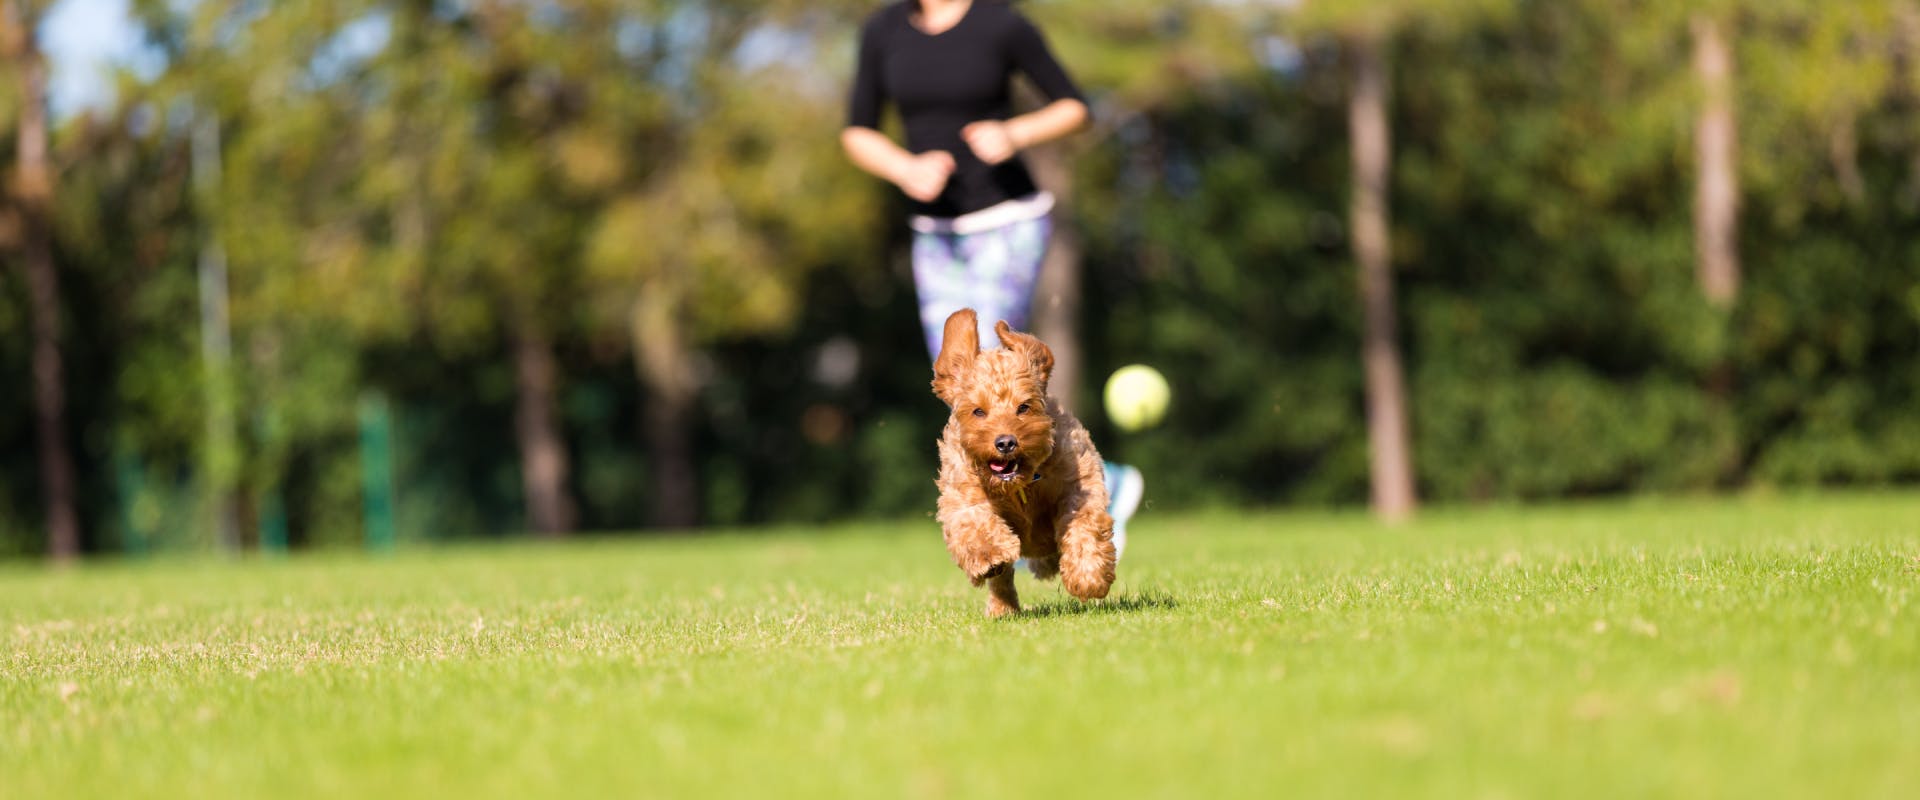 A dog chases a ball in a dog park. 